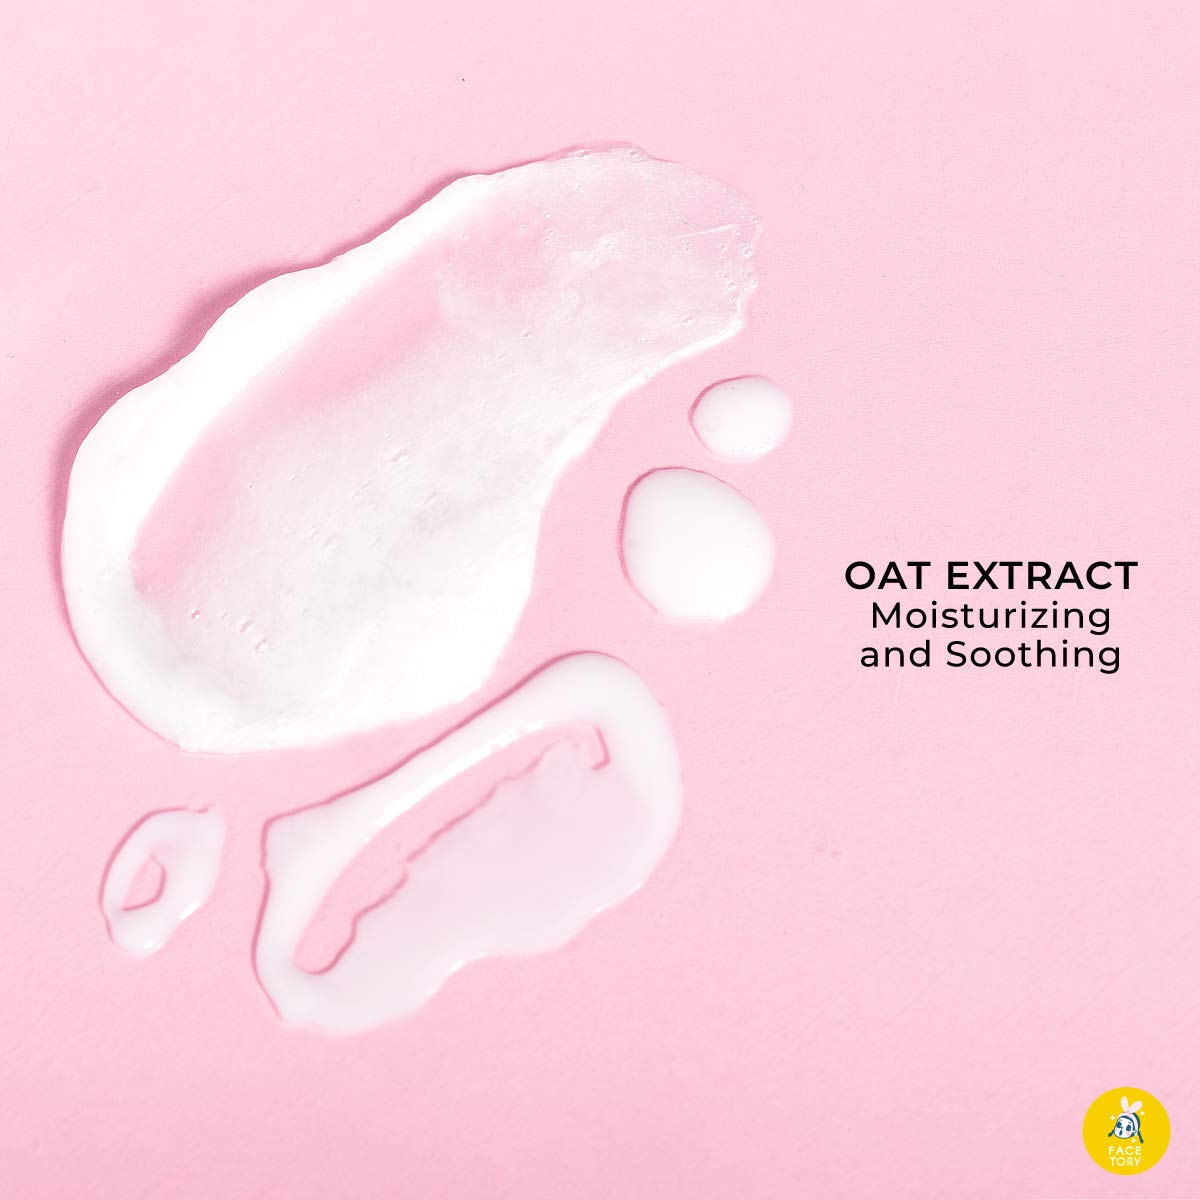 FACETORY Oat Skin Care Bundle made with Oats Extract - Contains 5 Oats My Bananas Sheet Masks, 1 Cloud Puff Cleanser, and 1 Calming Glow Facial Oil - Moisturizing, Nourishing, Smoothing